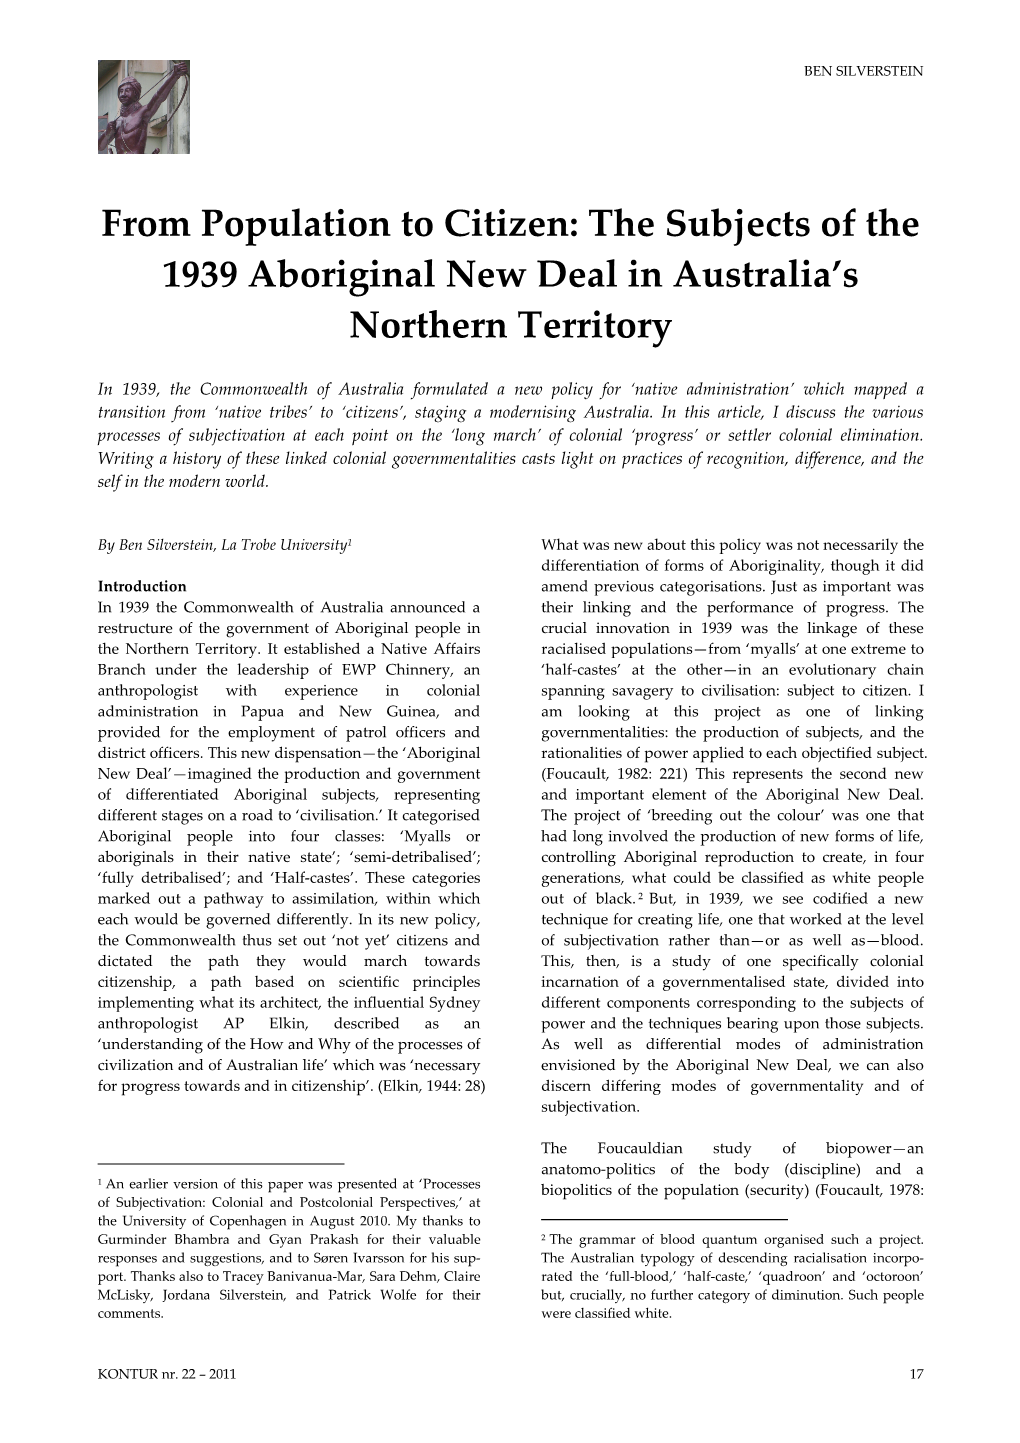 From Population to Citizen: the Subjects of the 1939 Aboriginal New Deal in Australia’S Northern Territory